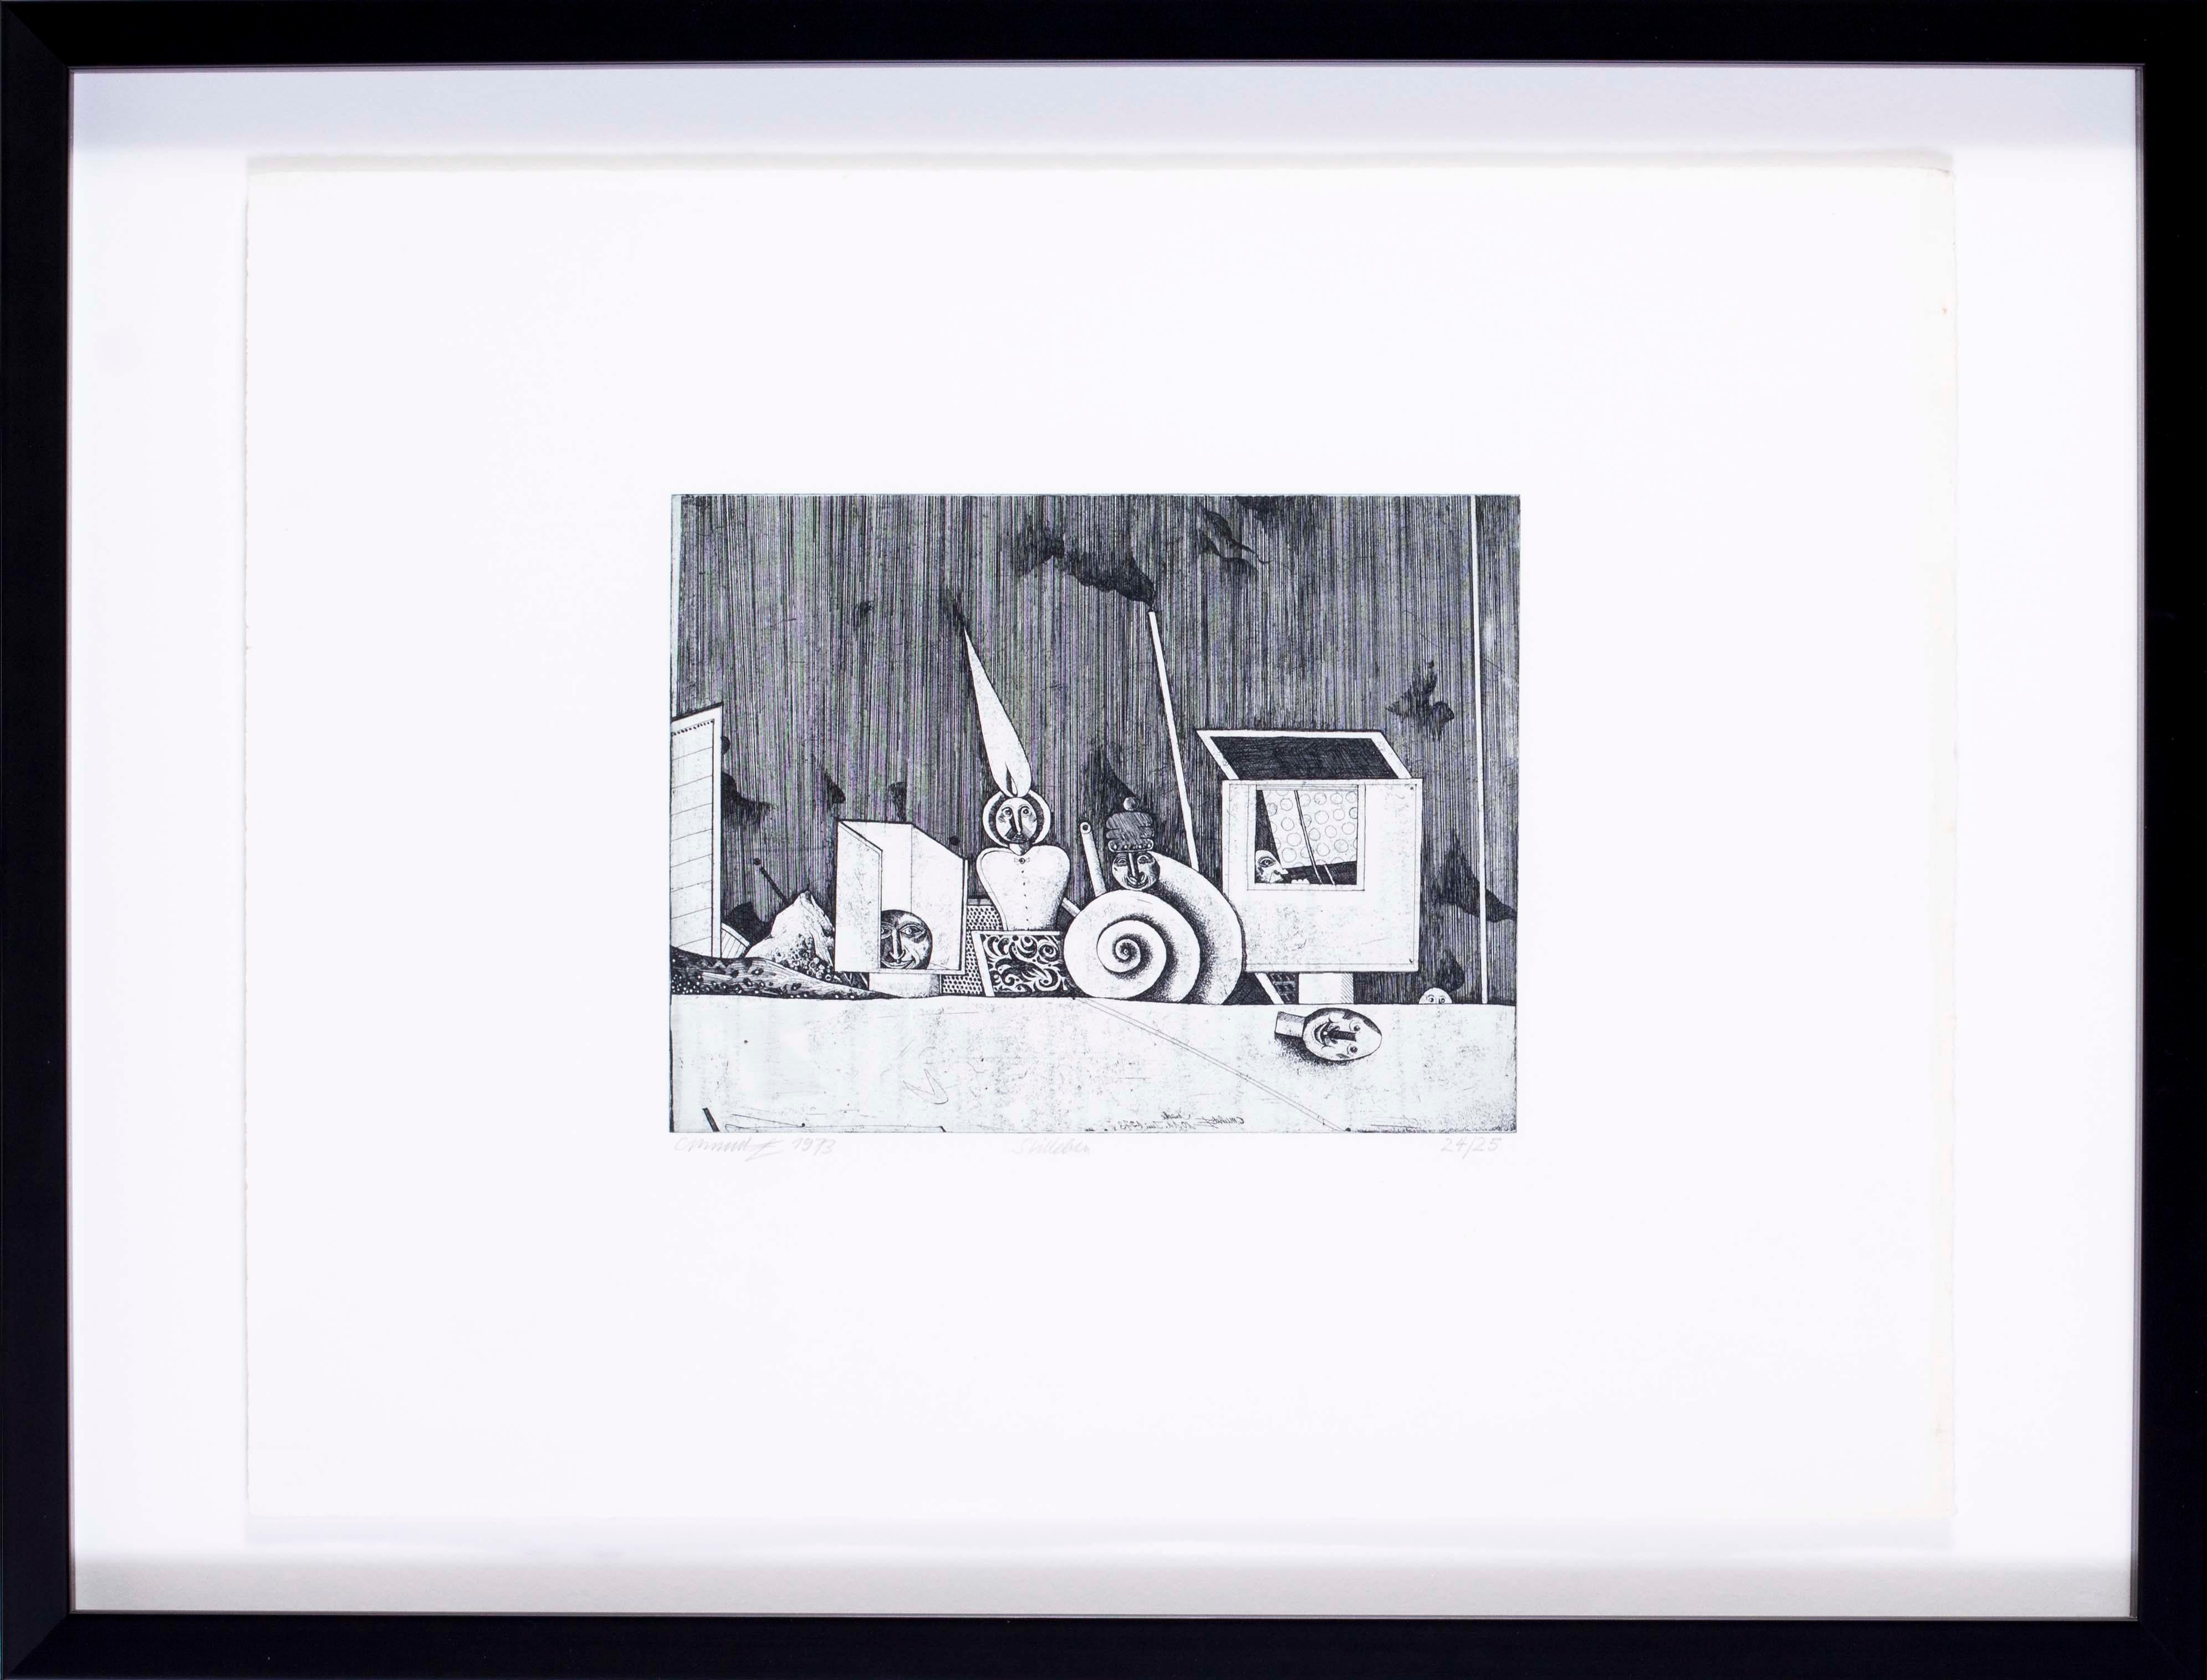 Unknown Abstract Print - 1970s Surrealist black and white etchings by German artist Christoph Muhil